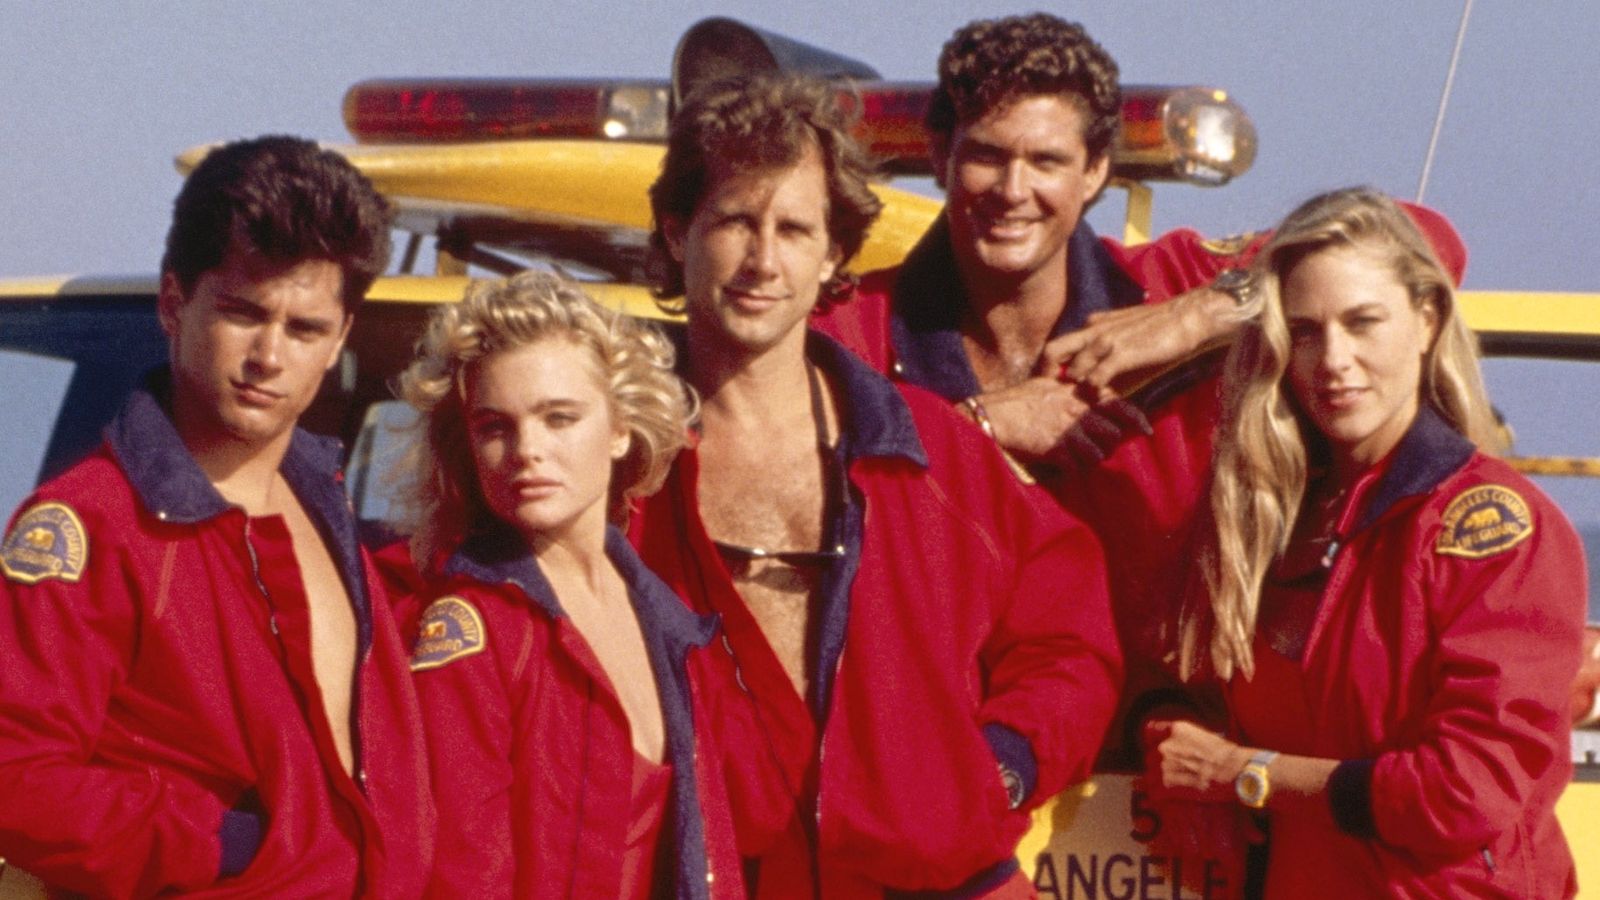 Baywatch set to return to TV screens in reboot - reports